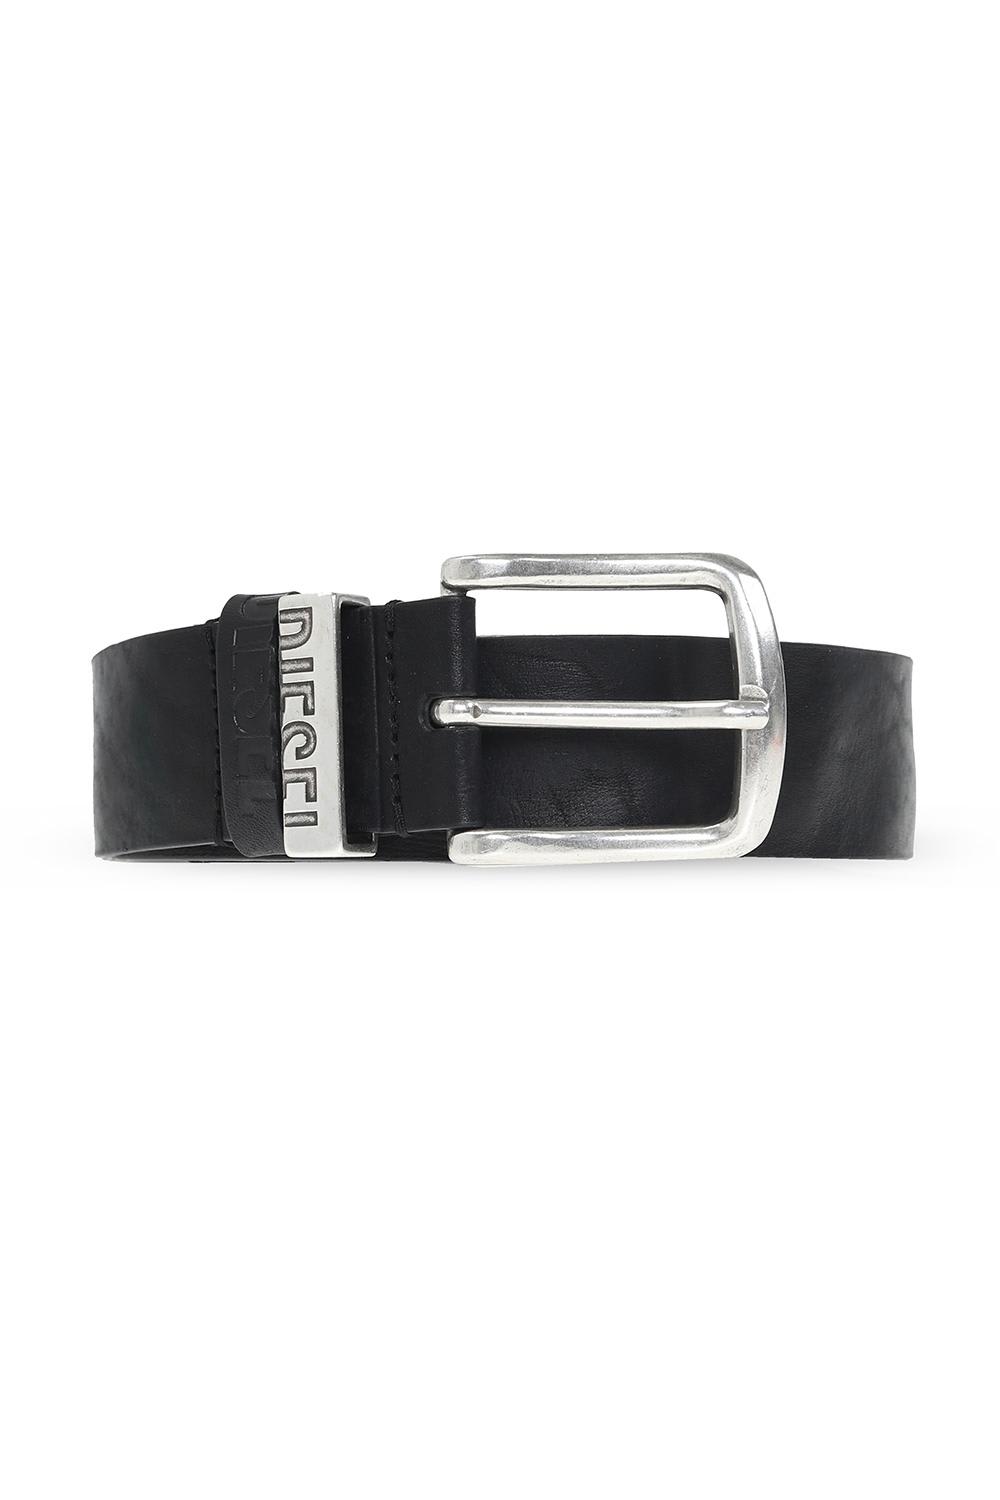 b-visible Leather Belt